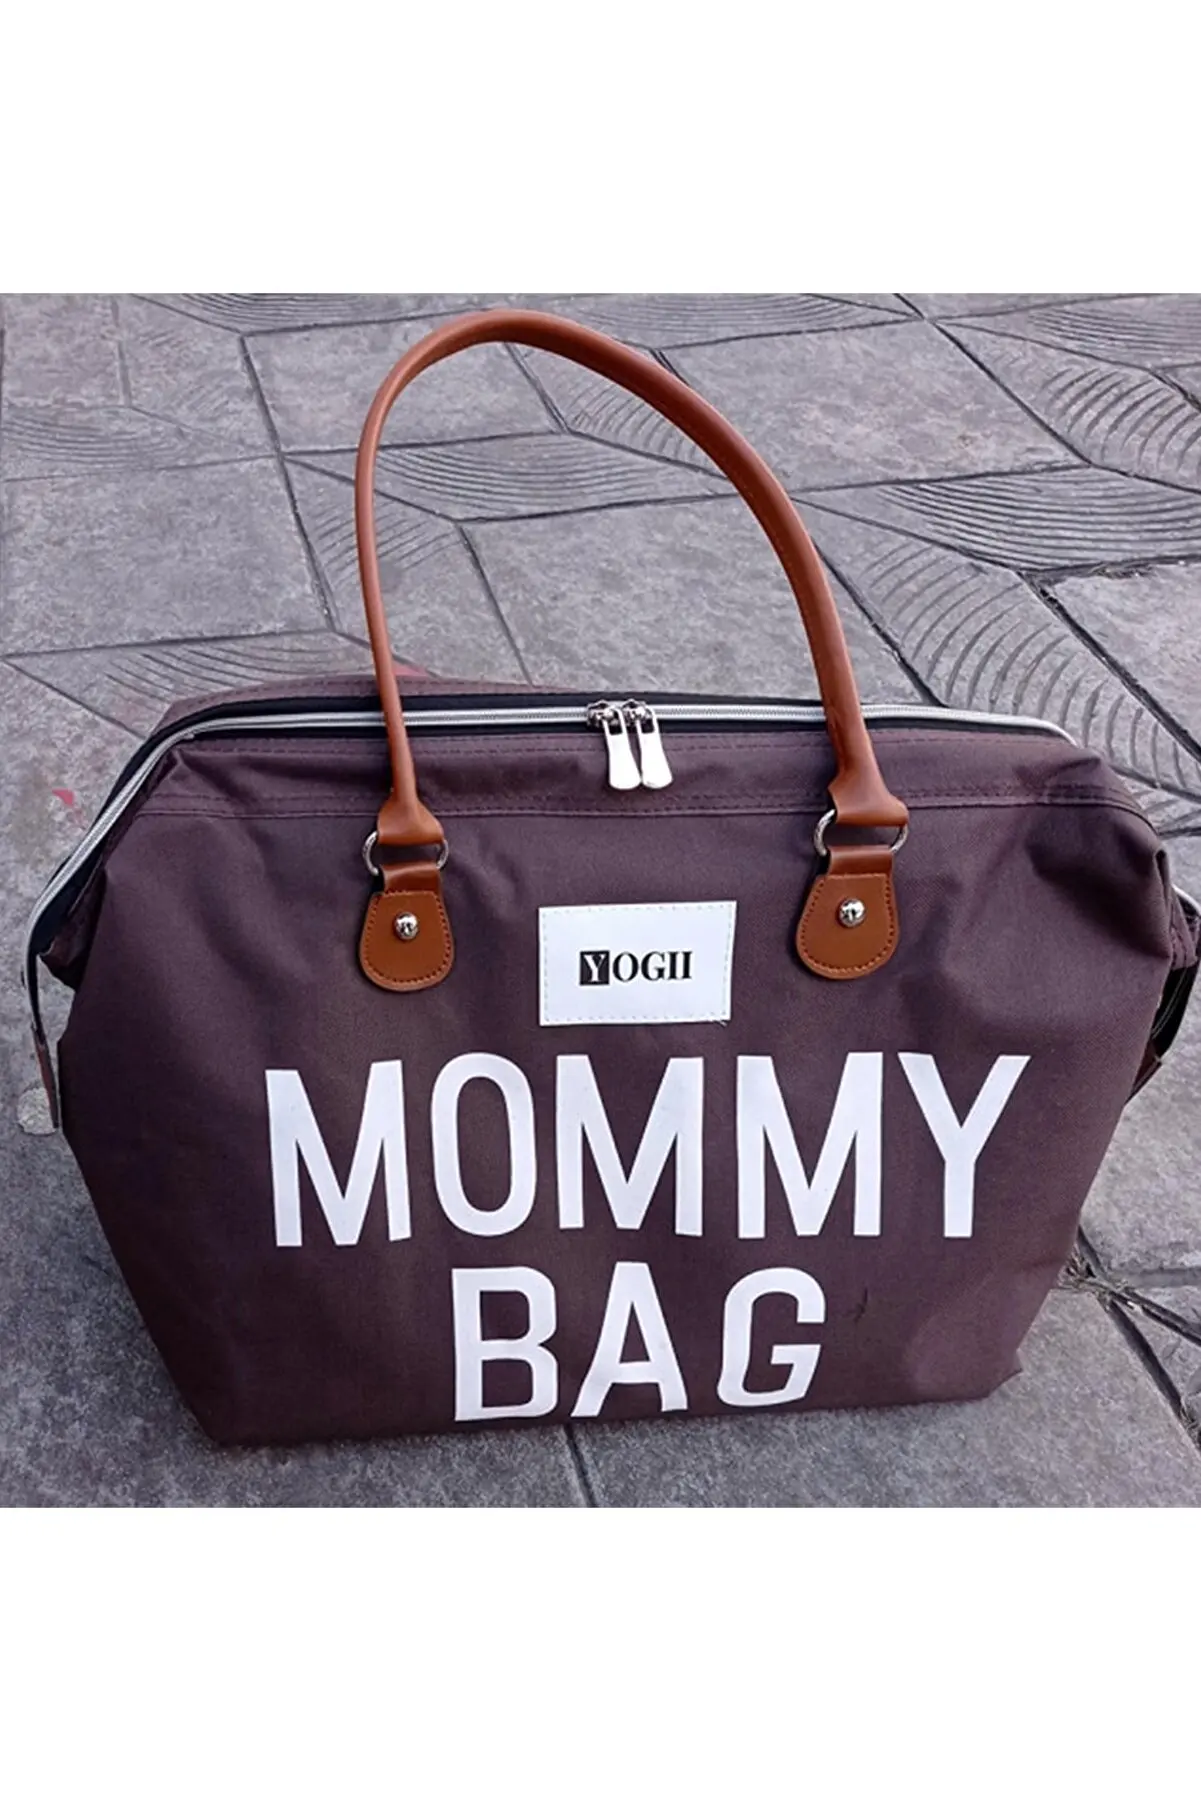 https://ae01.alicdn.com/kf/A5471ede836194845bdc29afa8c6fa8caY/Mommy-Bag-Mother-Baby-Care-Bag-Big-size-Thermos-Baby-Bottle-Compartment-Shoulder-Bag-Hospital-Outlet.jpg